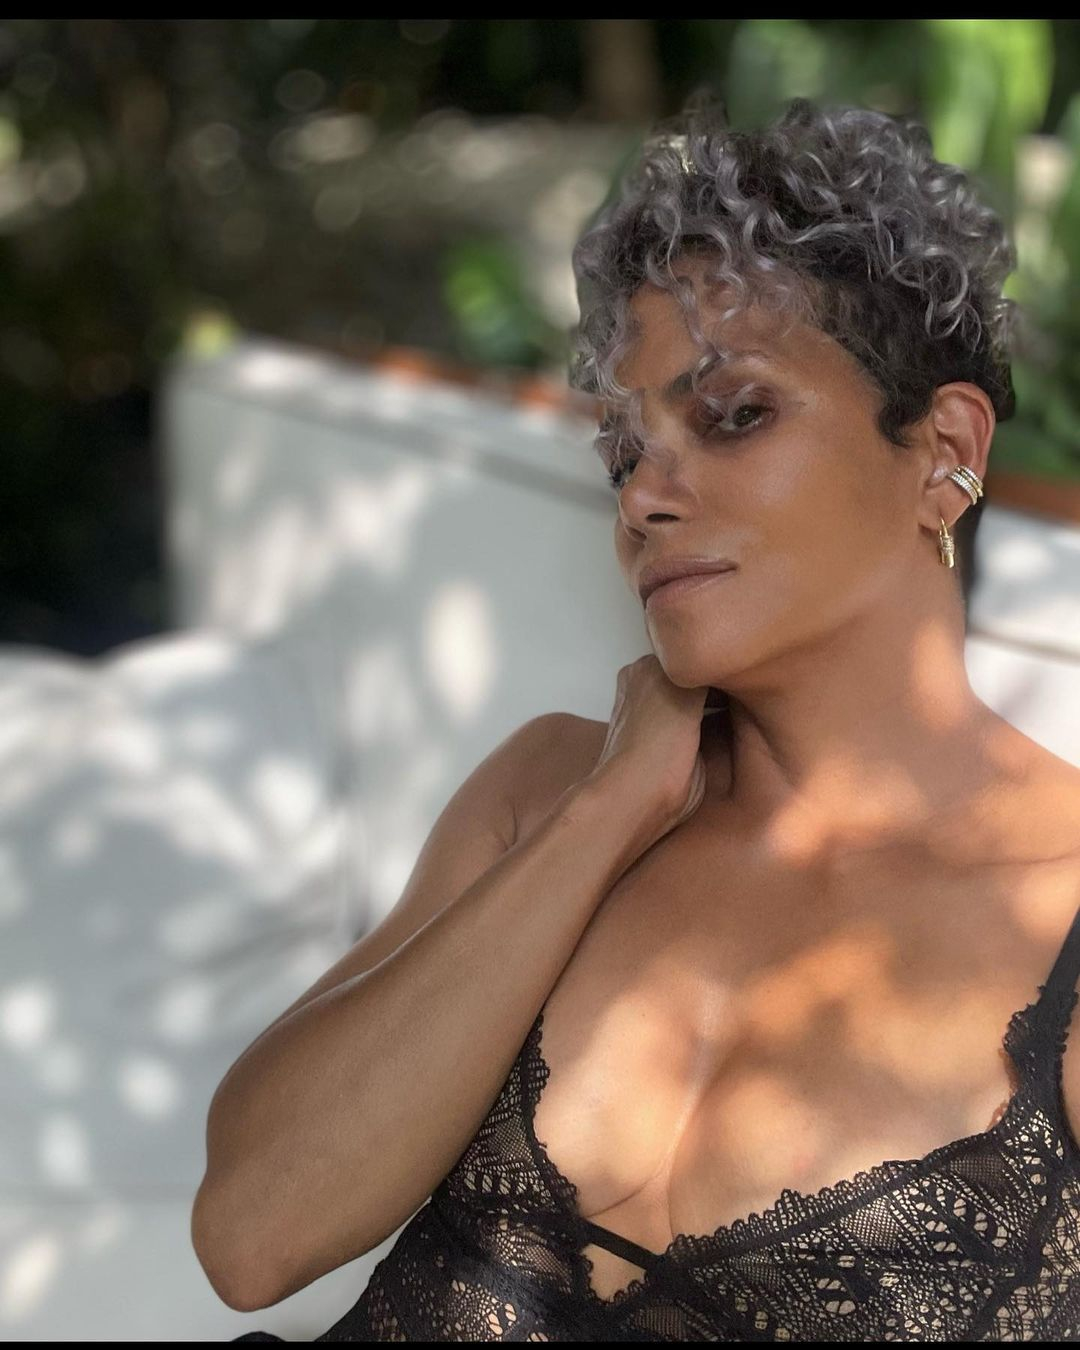 Halle Berry is in the middle of menopause – and loving every